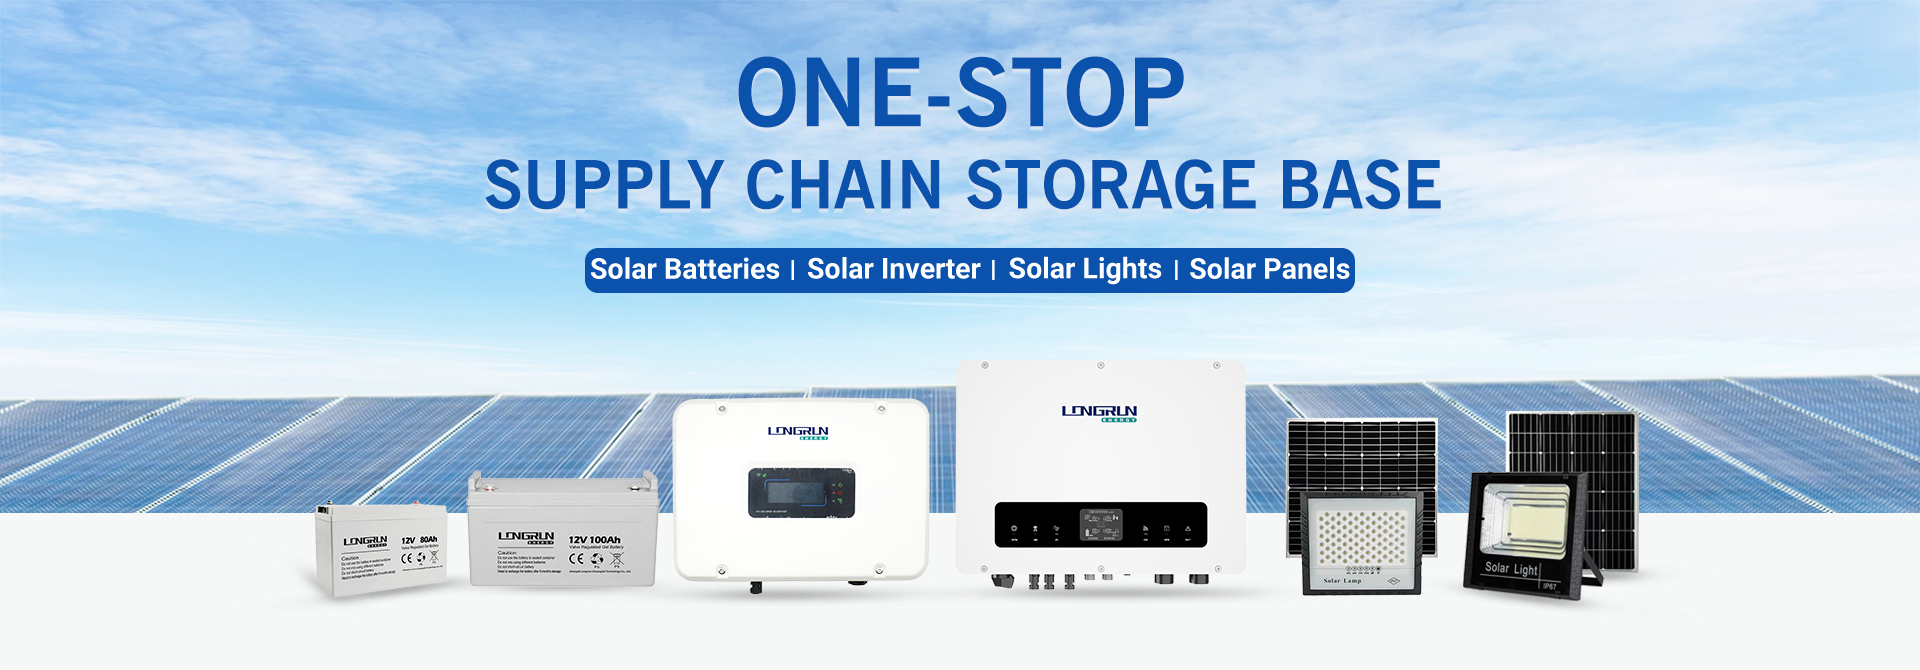 Vietnam’s electricity shortage is gradually increasing the demand for household energy storage